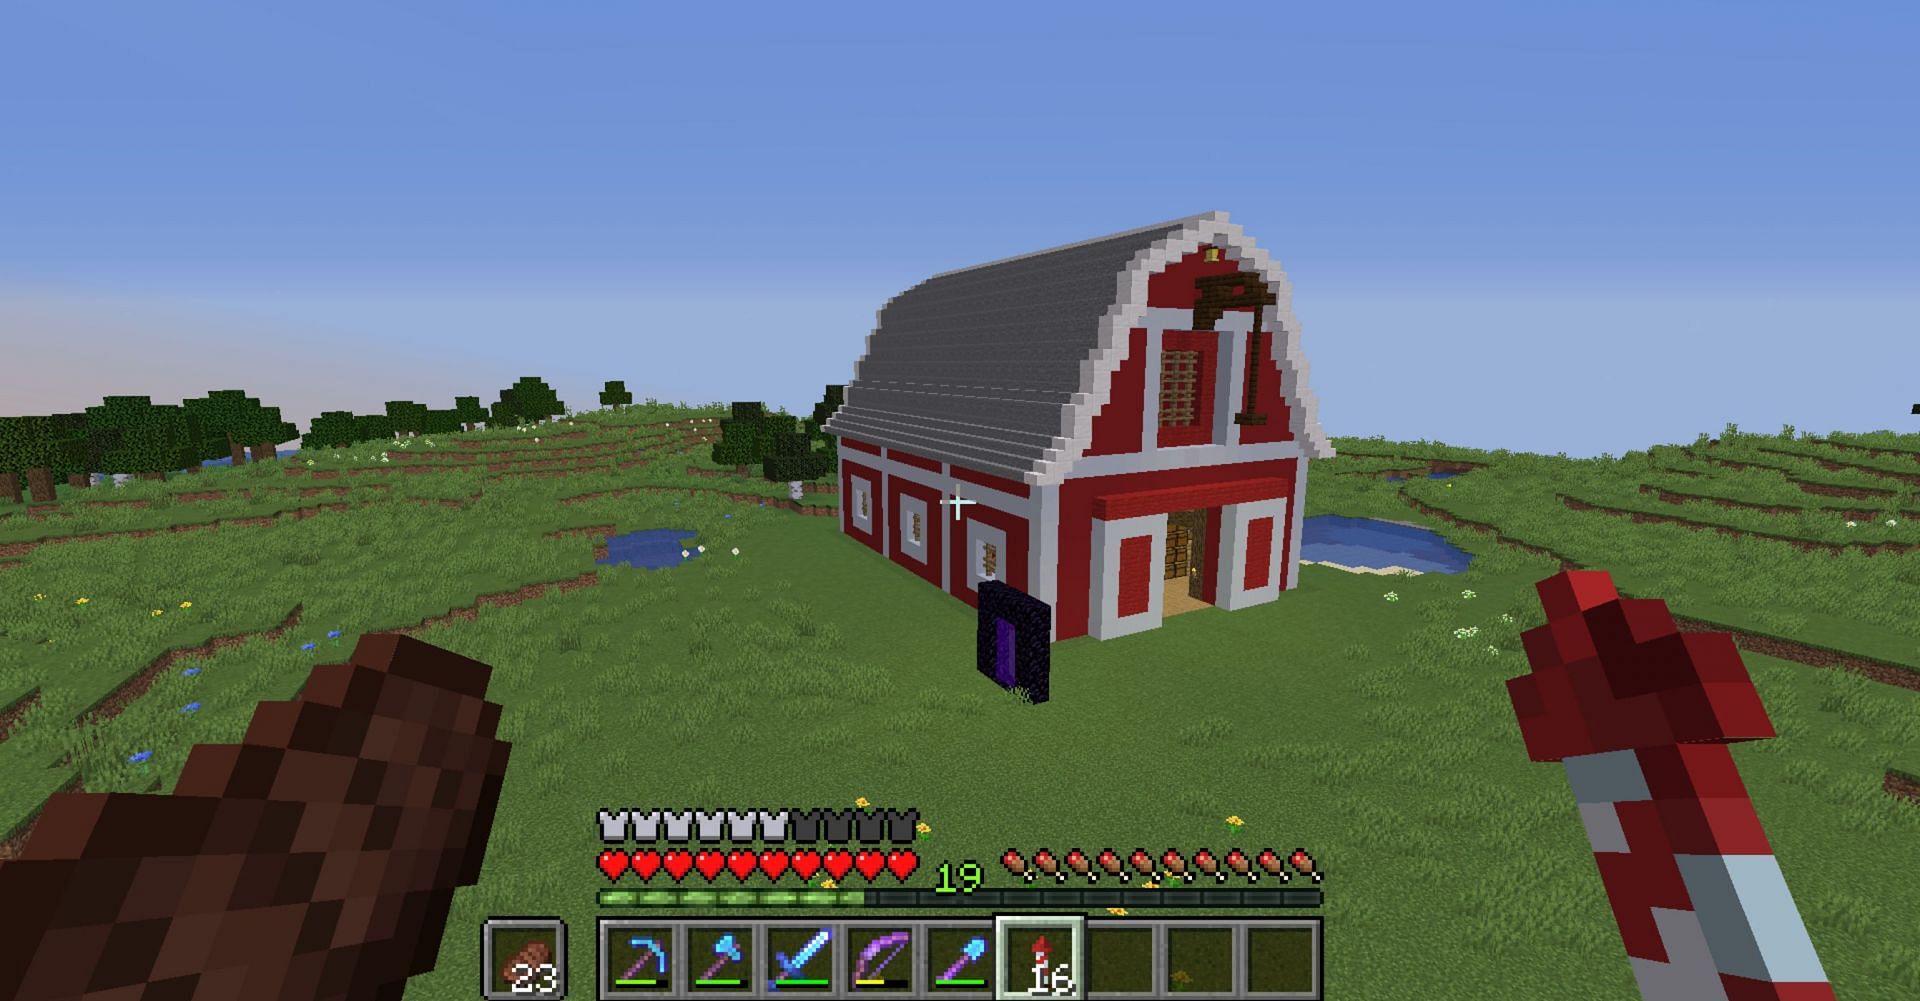 Barns in Minecraft come in many shapes and sizes (Image via u/CraaZzy__/Reddit)